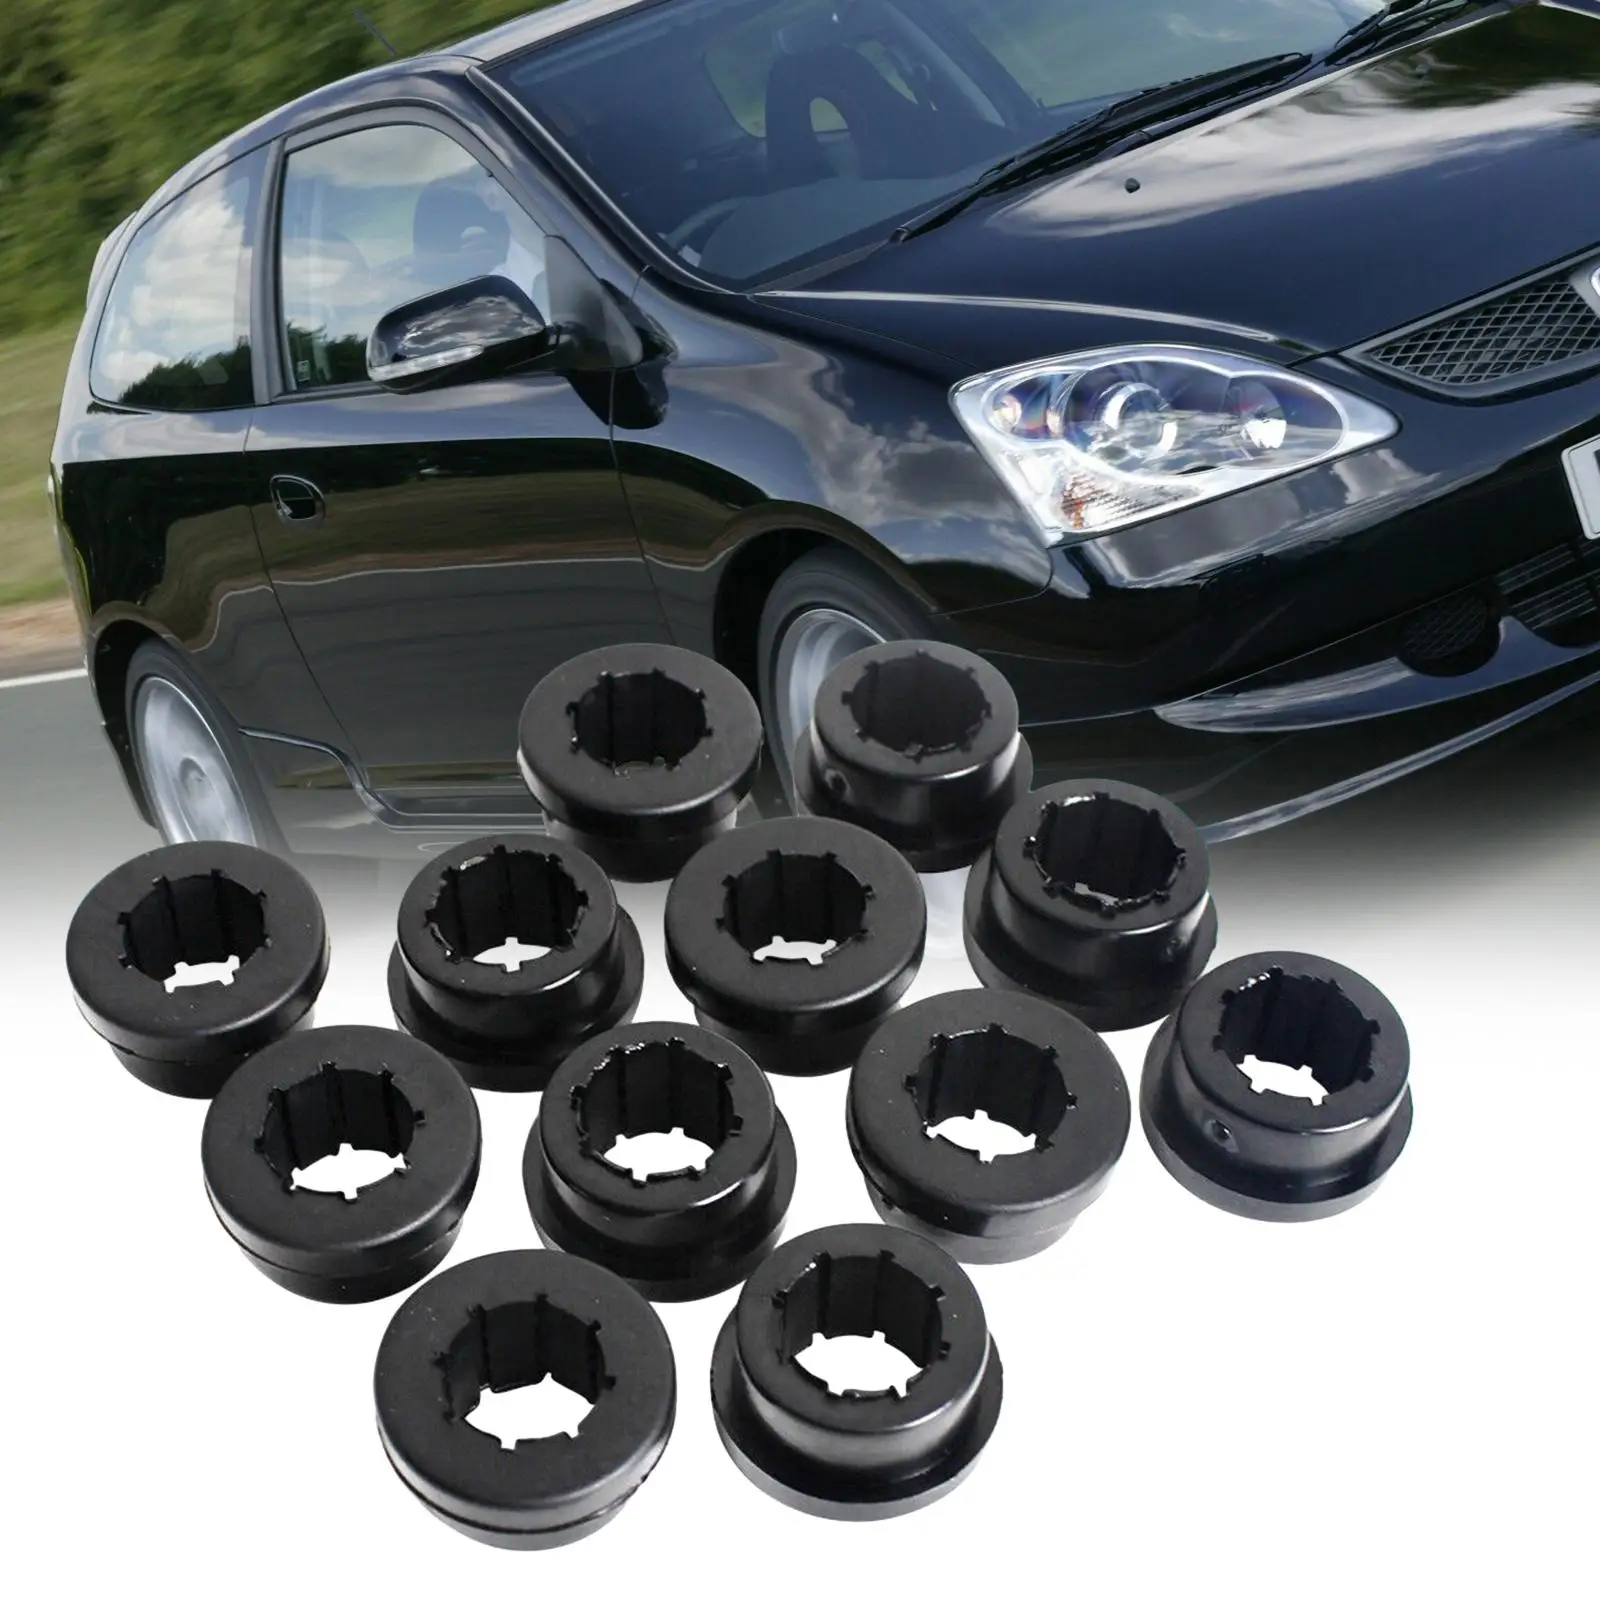 12 Pieces Lower Control Arm Rear Camber Bushings High Performance Directly Replace for Eg EK Dc Accessory